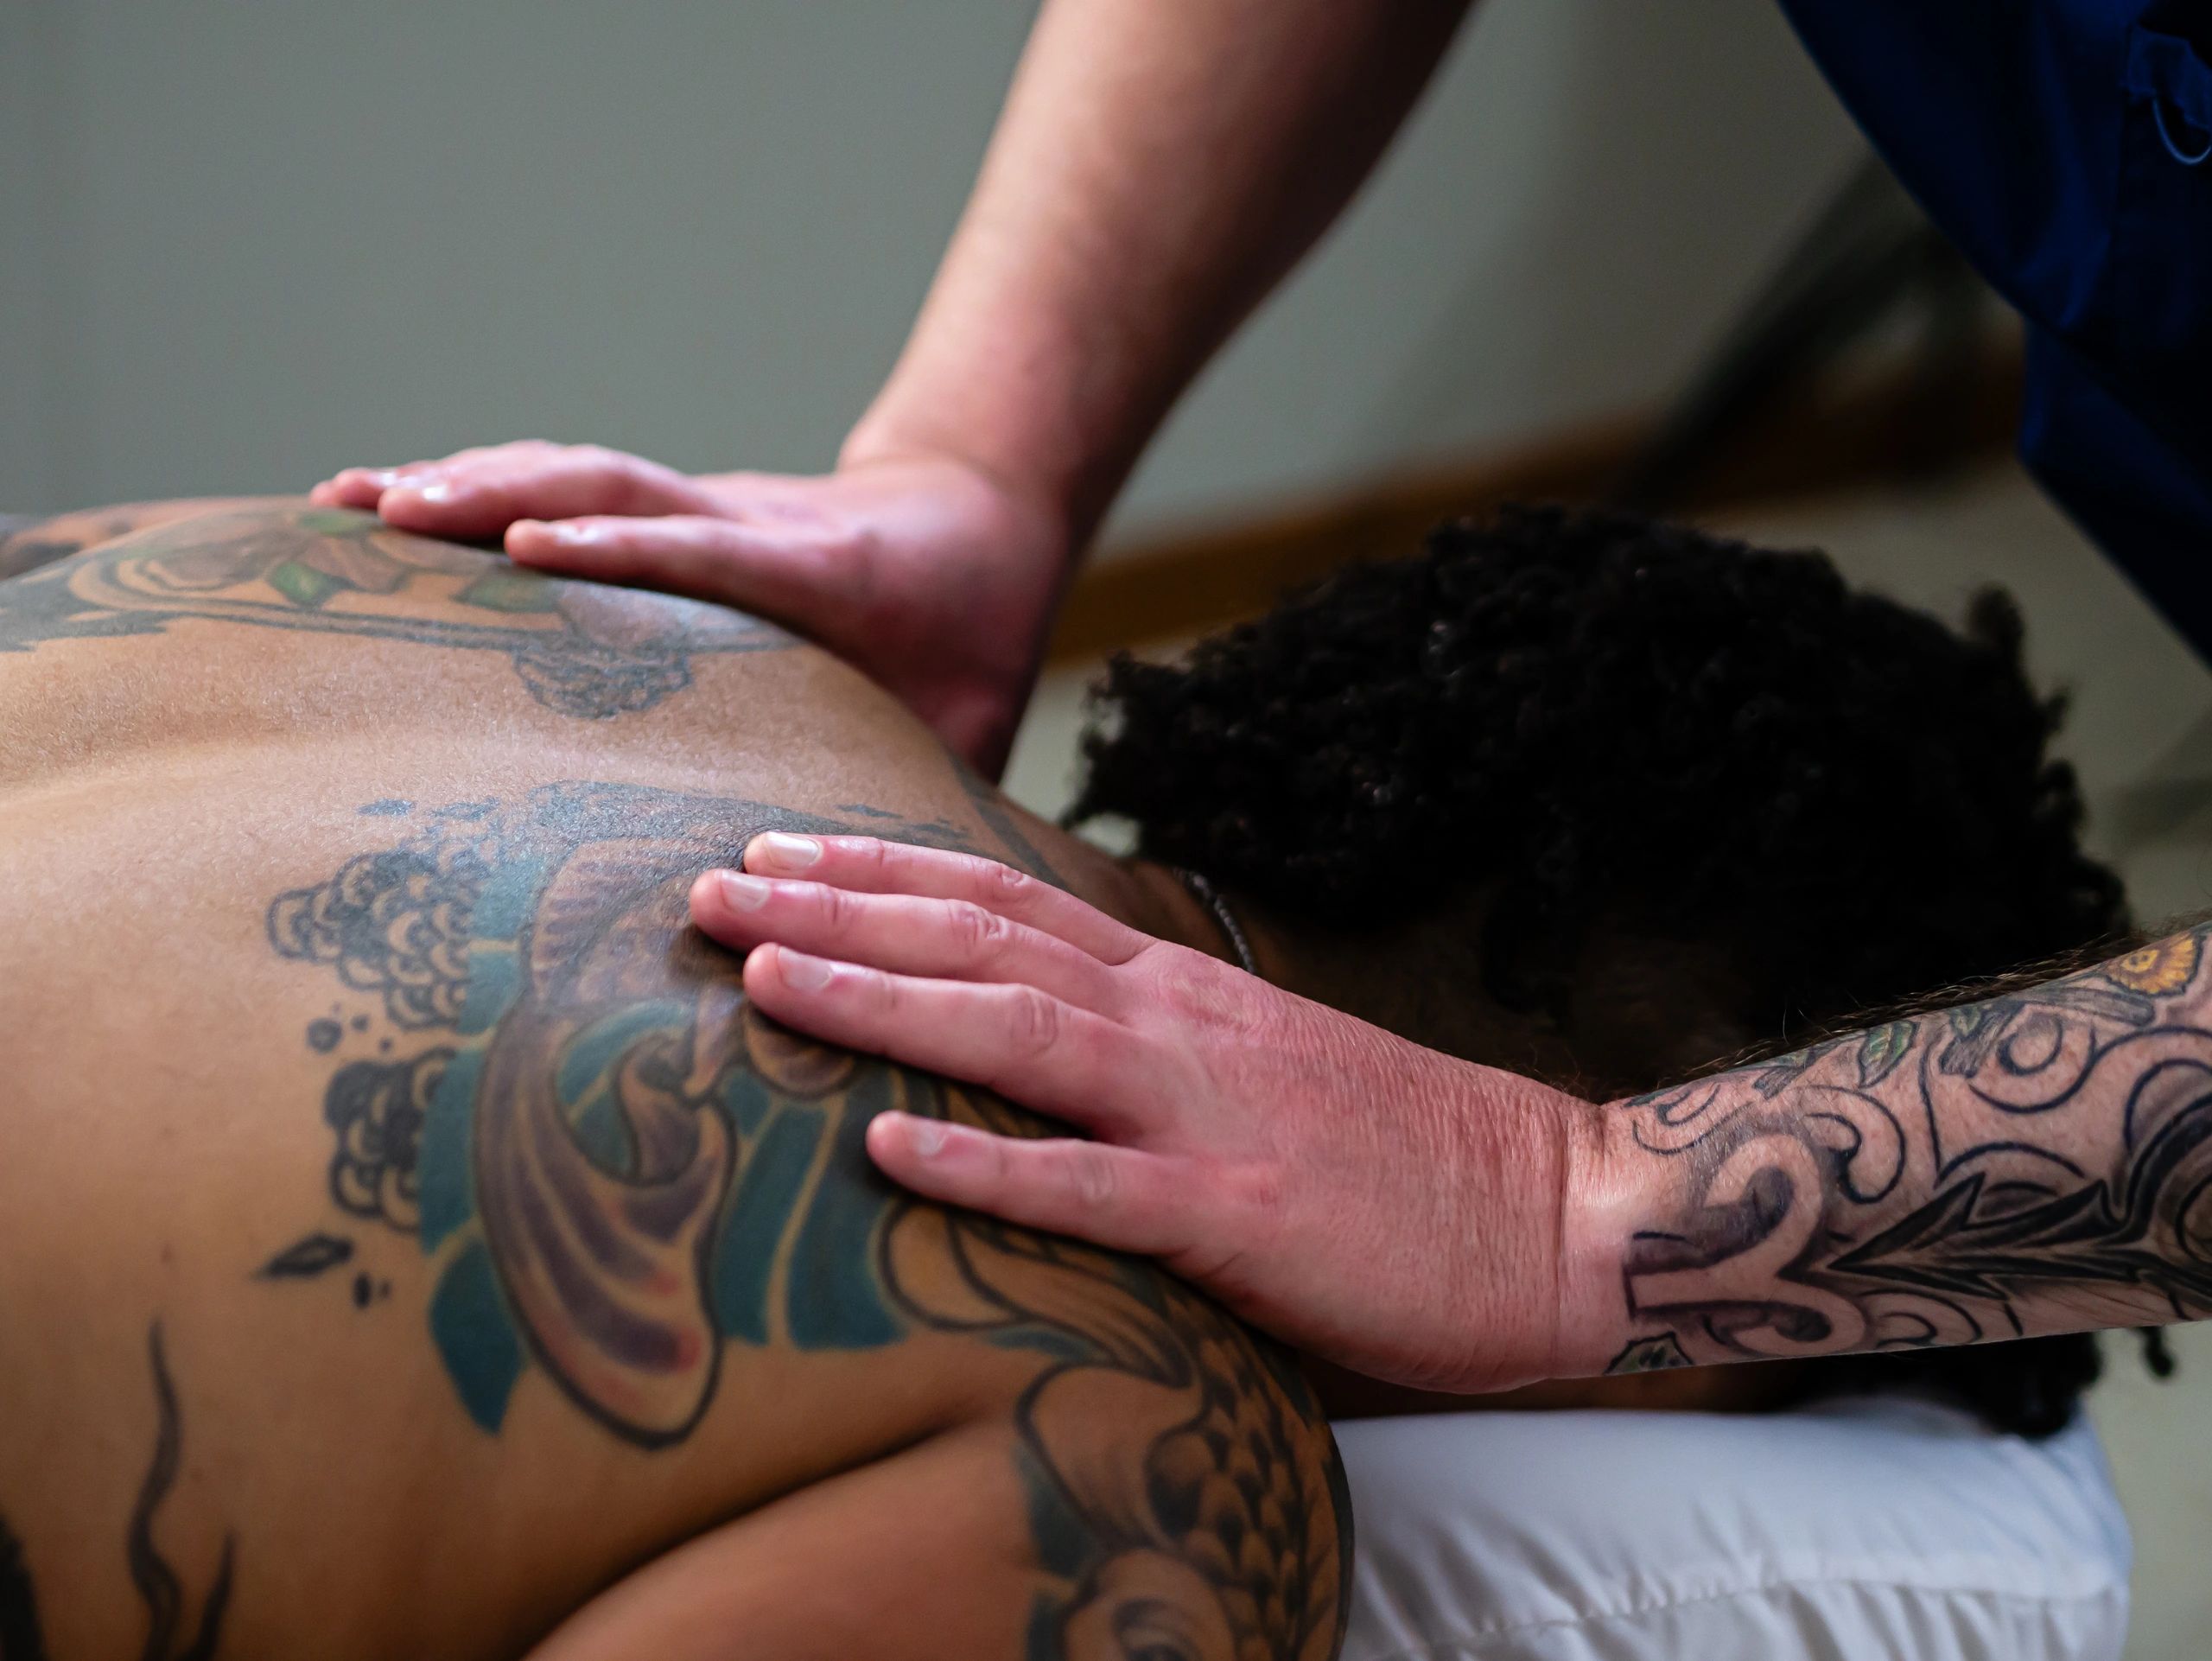 A person with melanated skin receives therapeutic massage from a licensed massage therapist.